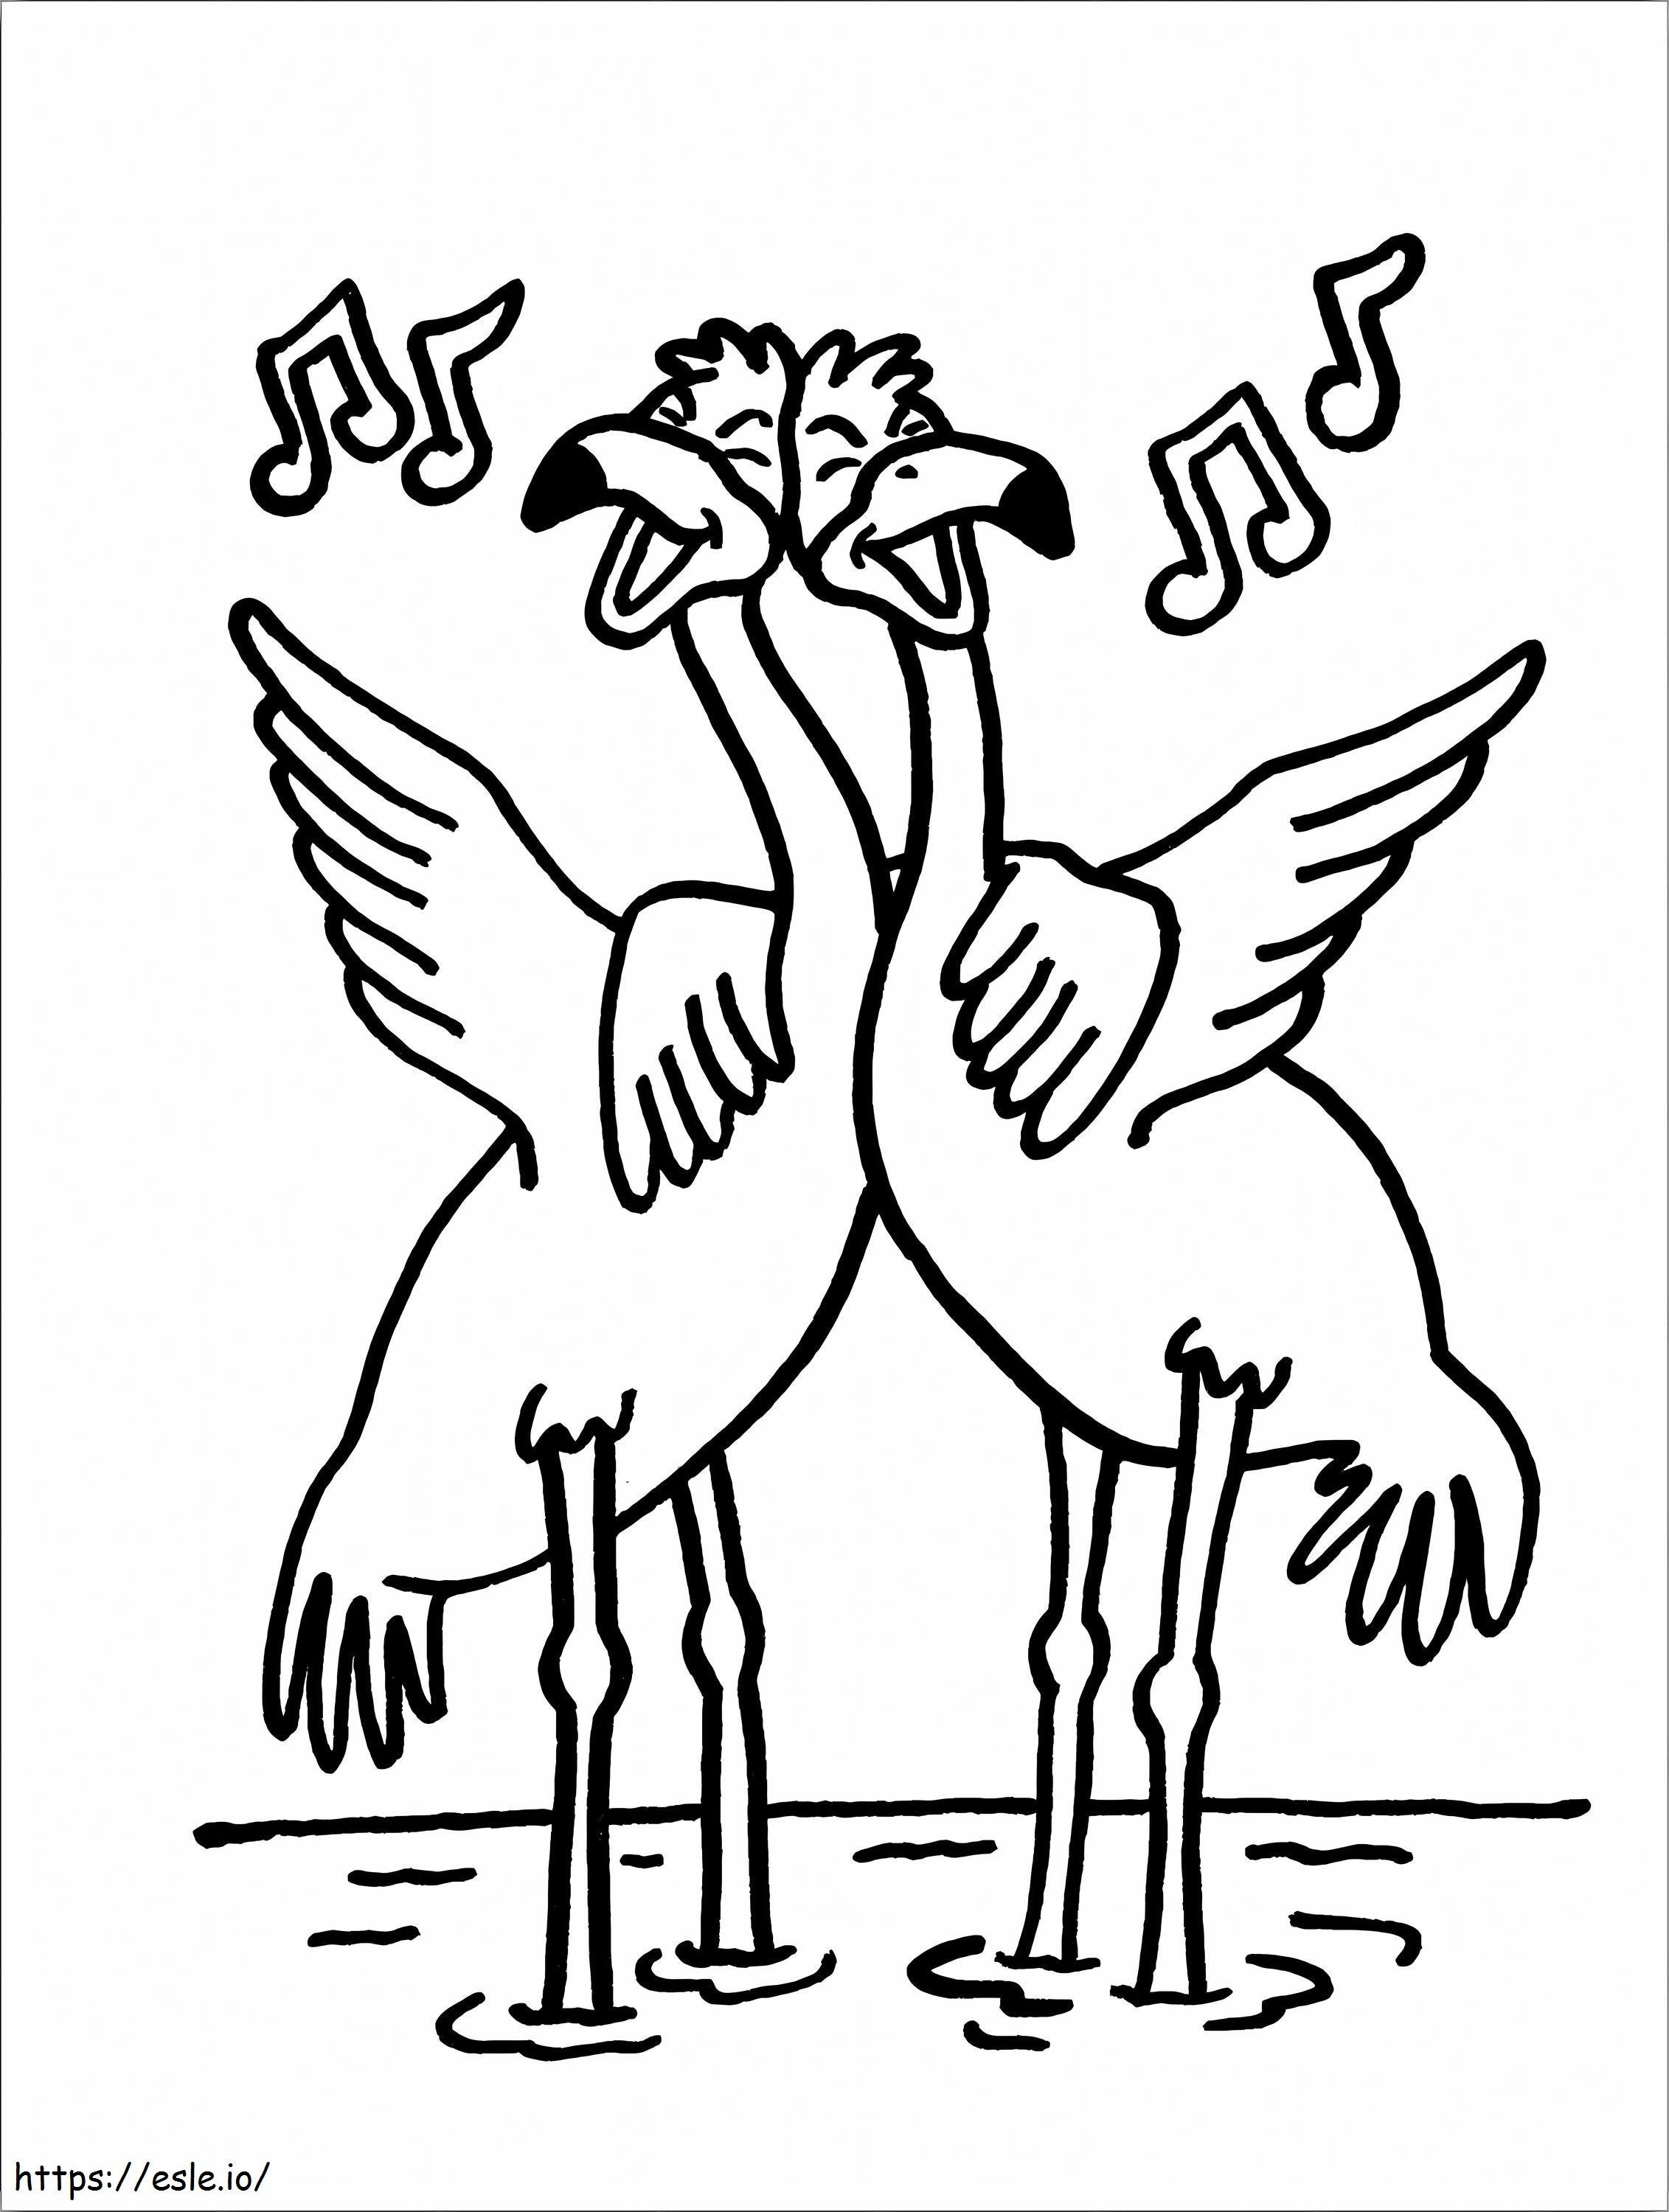 Two Funny Storks coloring page